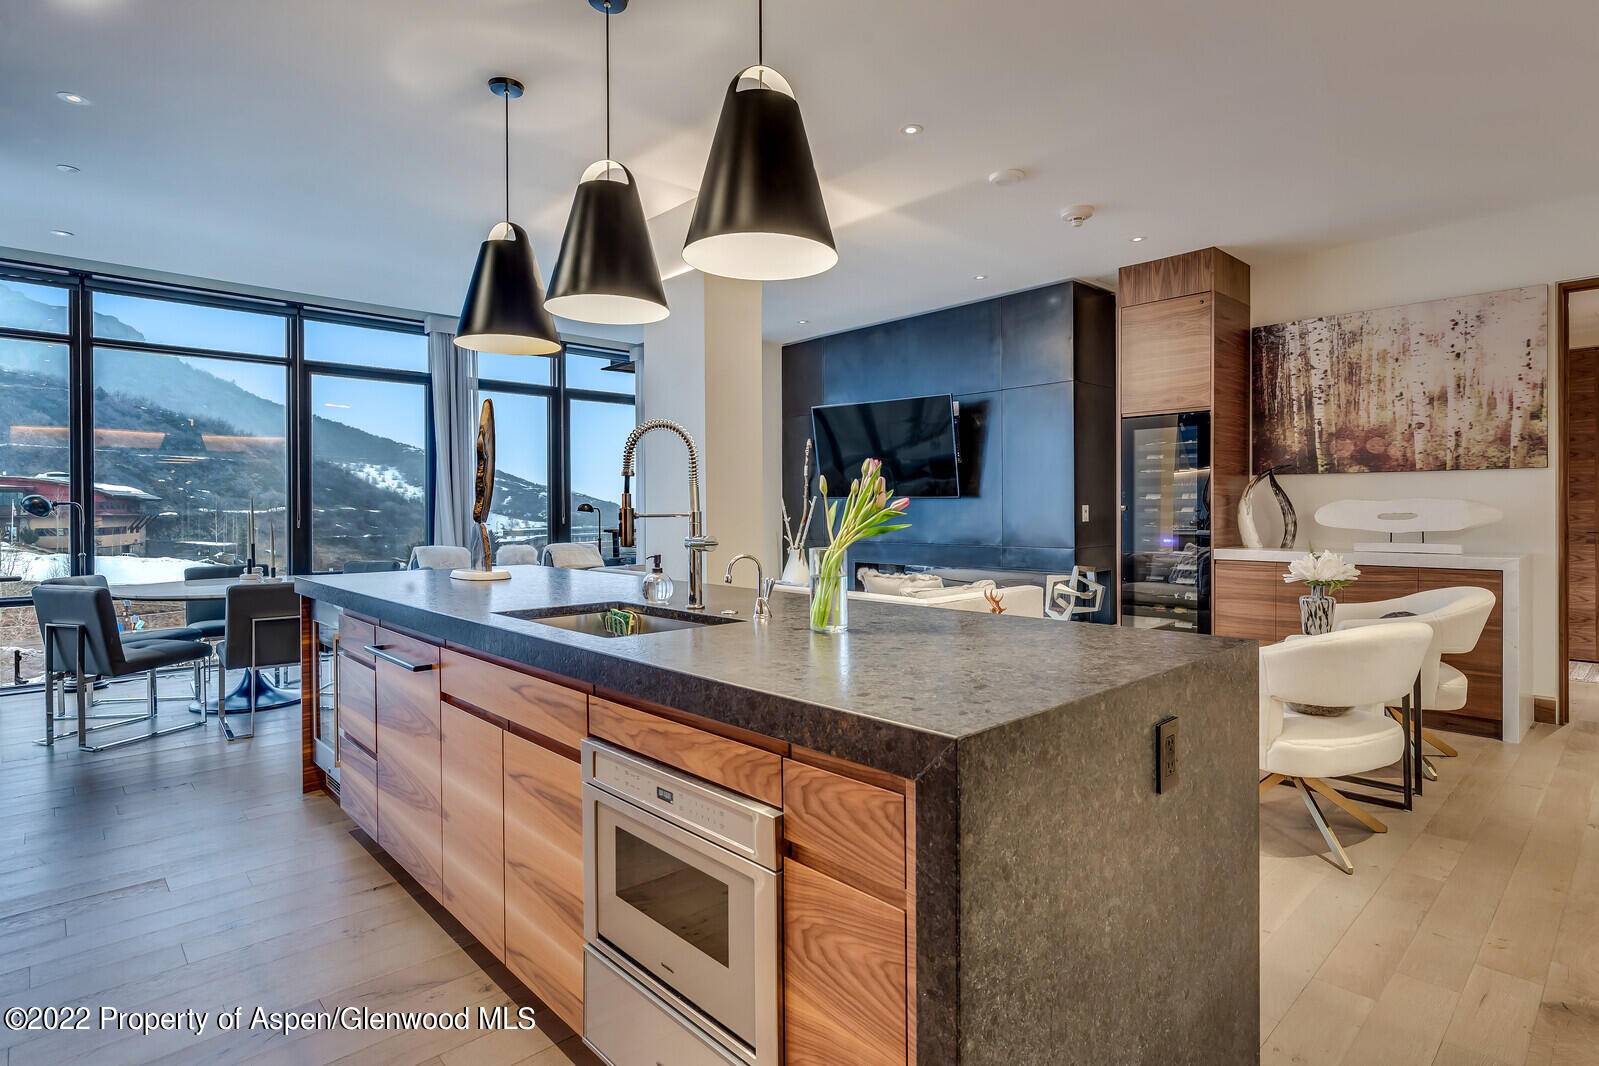 This stunning, 2 bedroom, 2 bath, contemporary, corner condo is located in the center of it all at One Snowmass West.